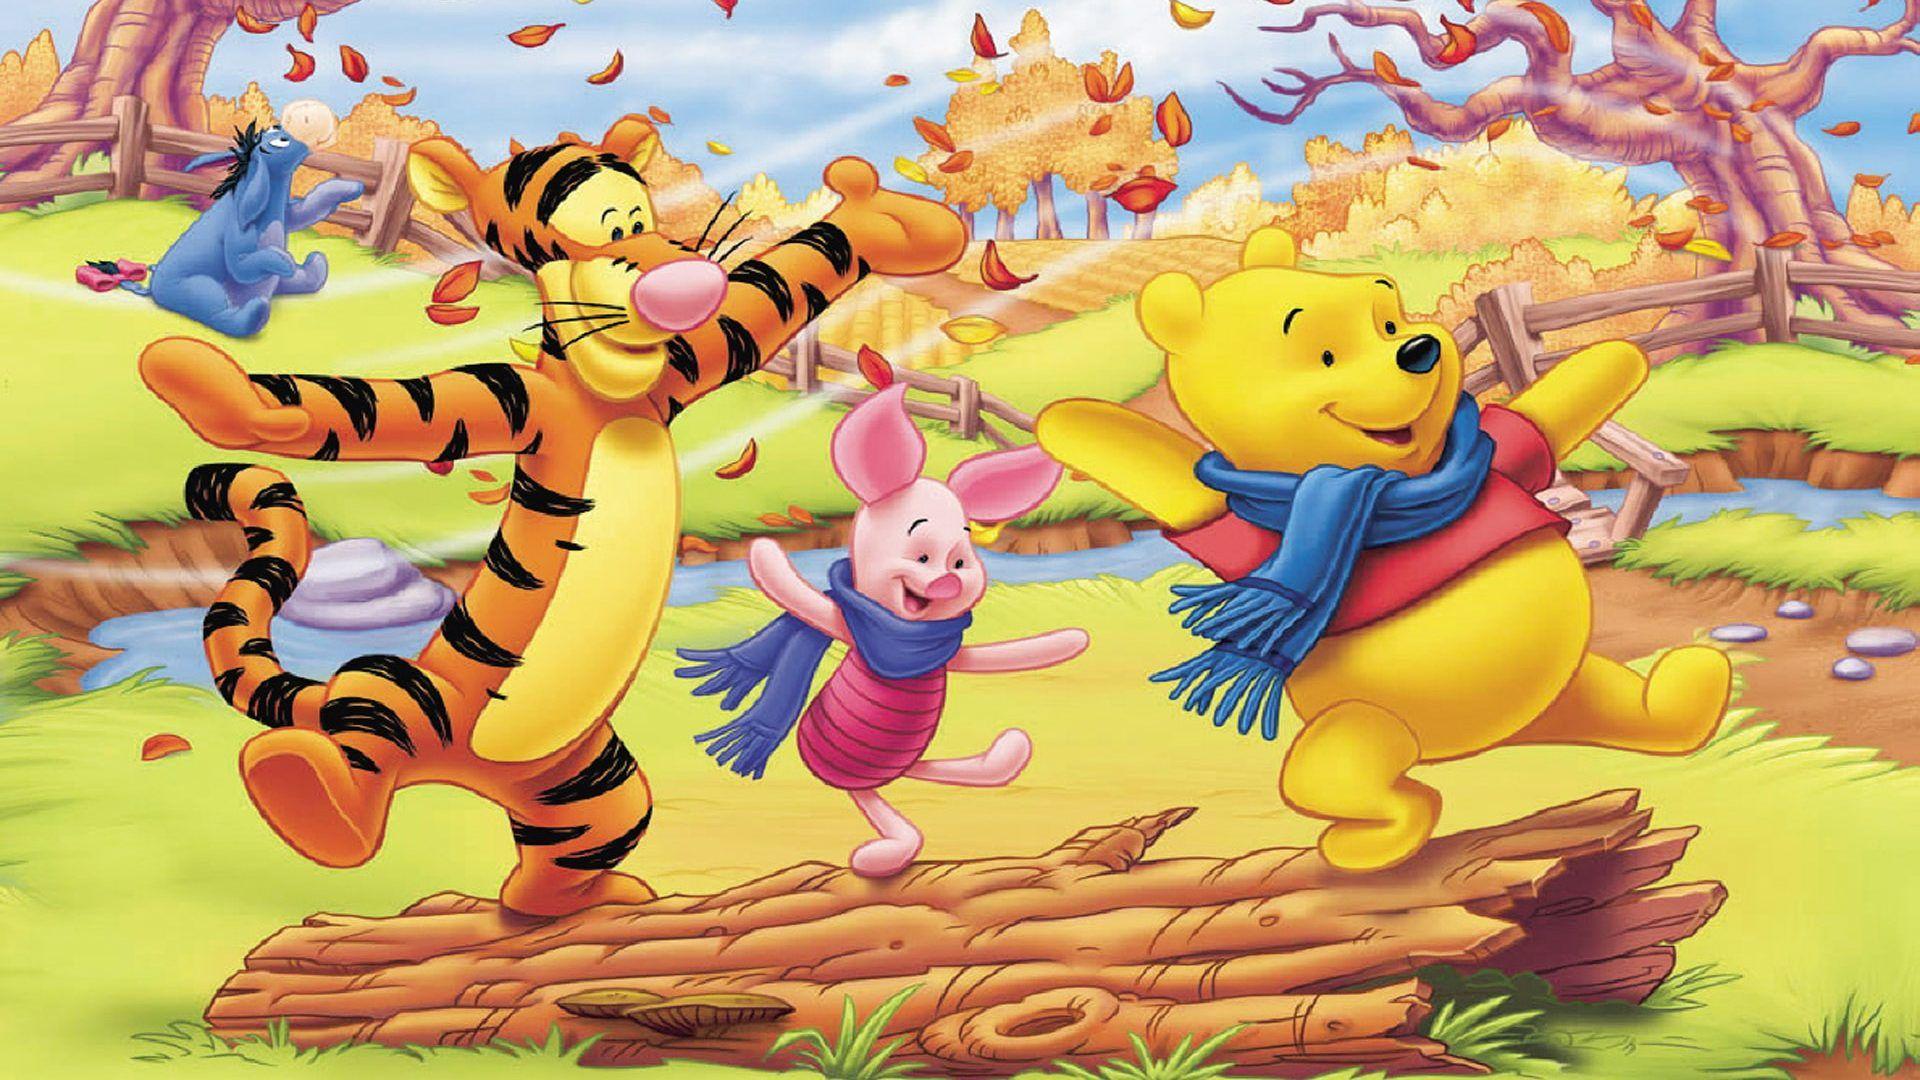 Winnie The Pooh And Friends Cartoon Image For Desktop Hd Wallpaper For Pc  Tablet And Mobile 2560x1600  Wallpapers13com